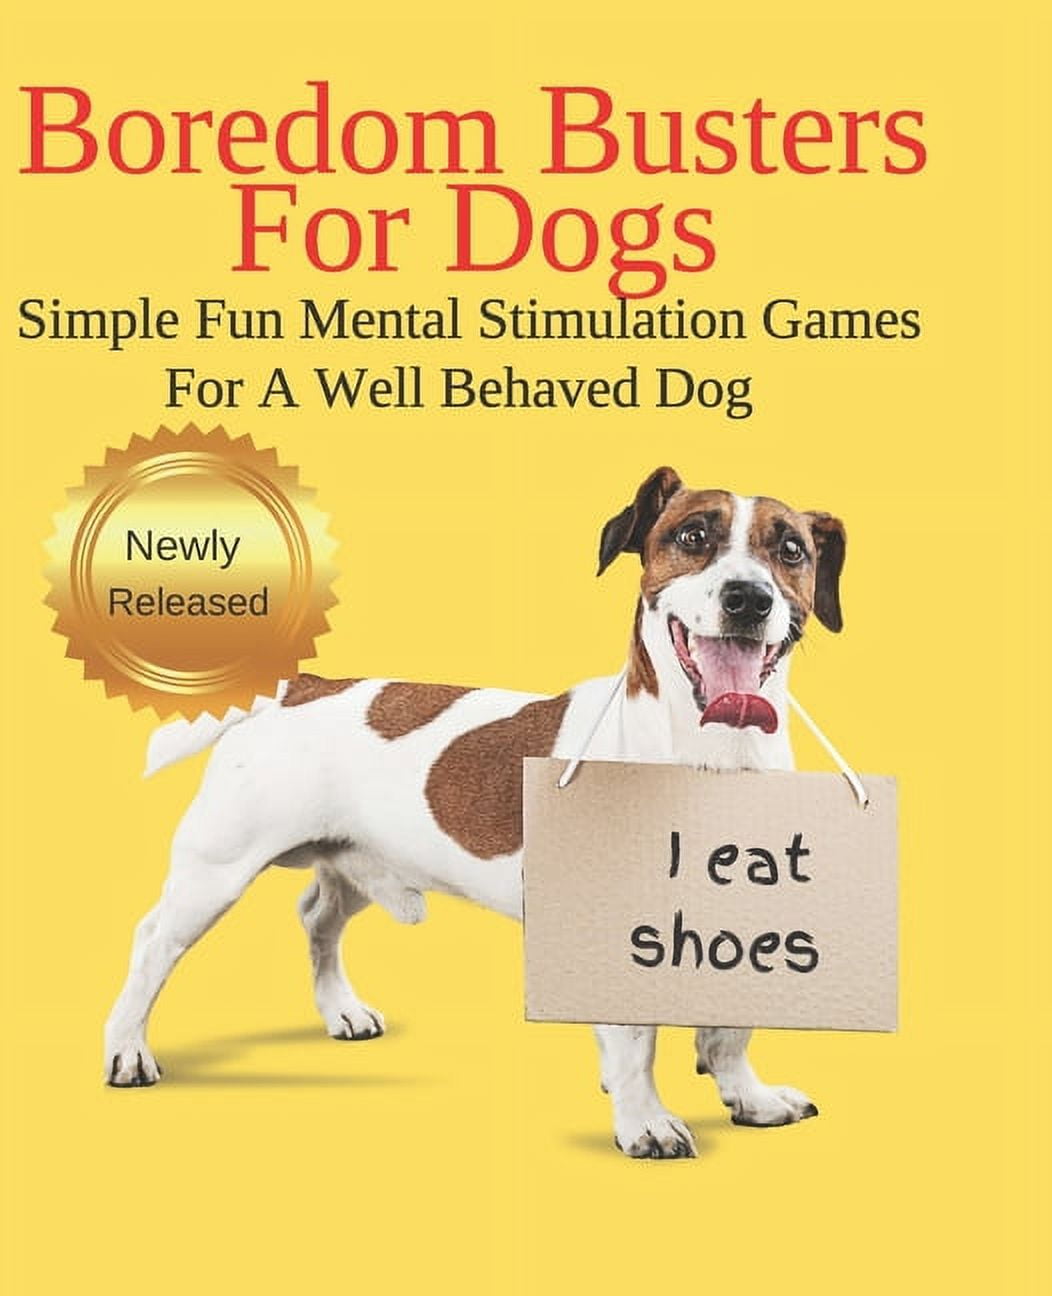 15 ways you can help your dog beat boredom (Part 3) –